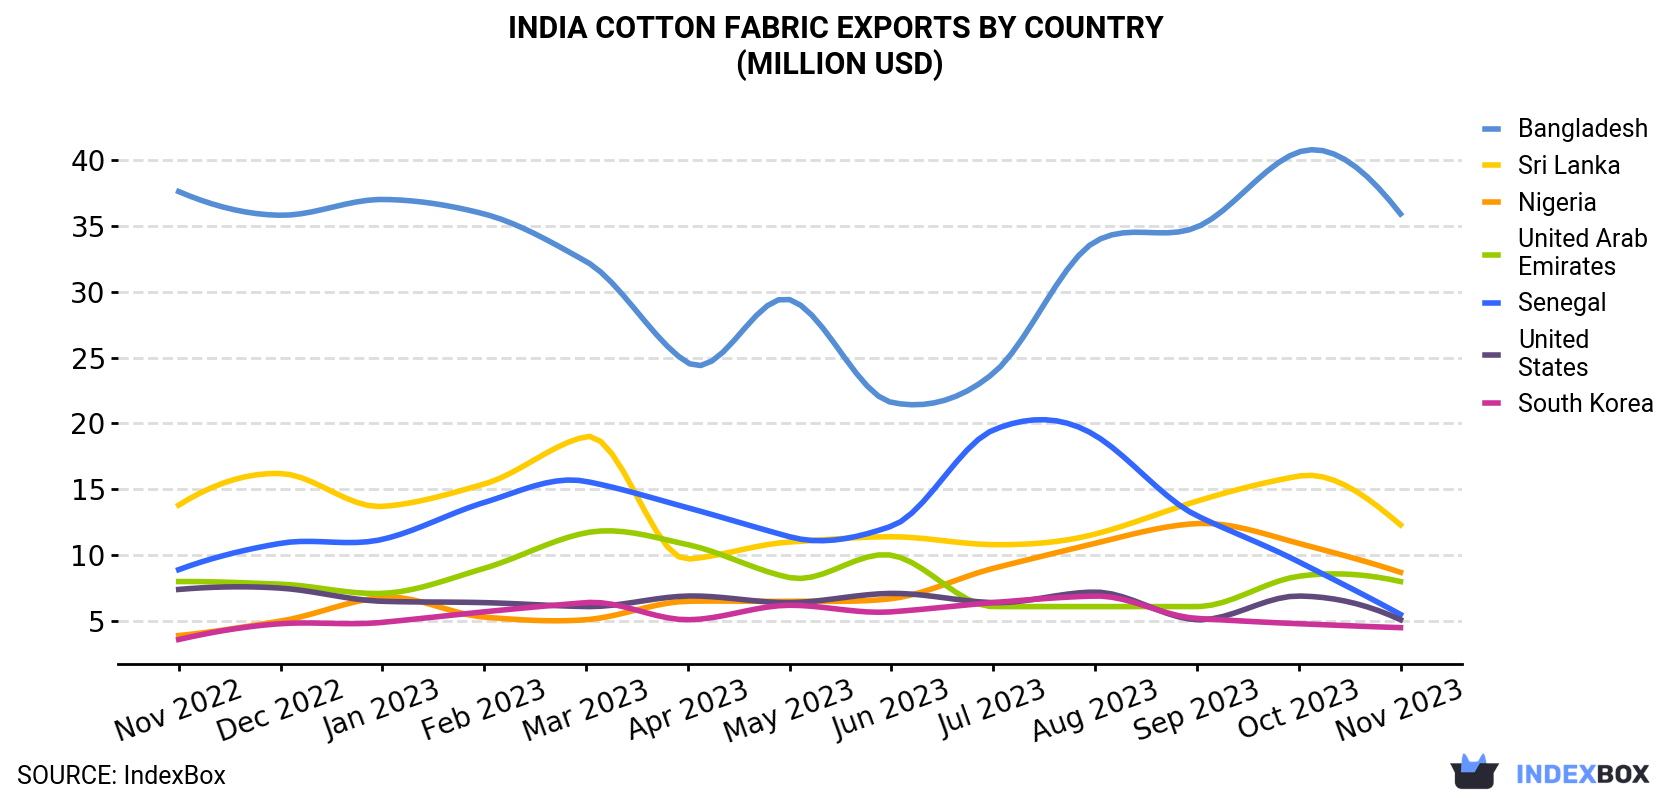 India Cotton Fabric Exports By Country (Million USD)